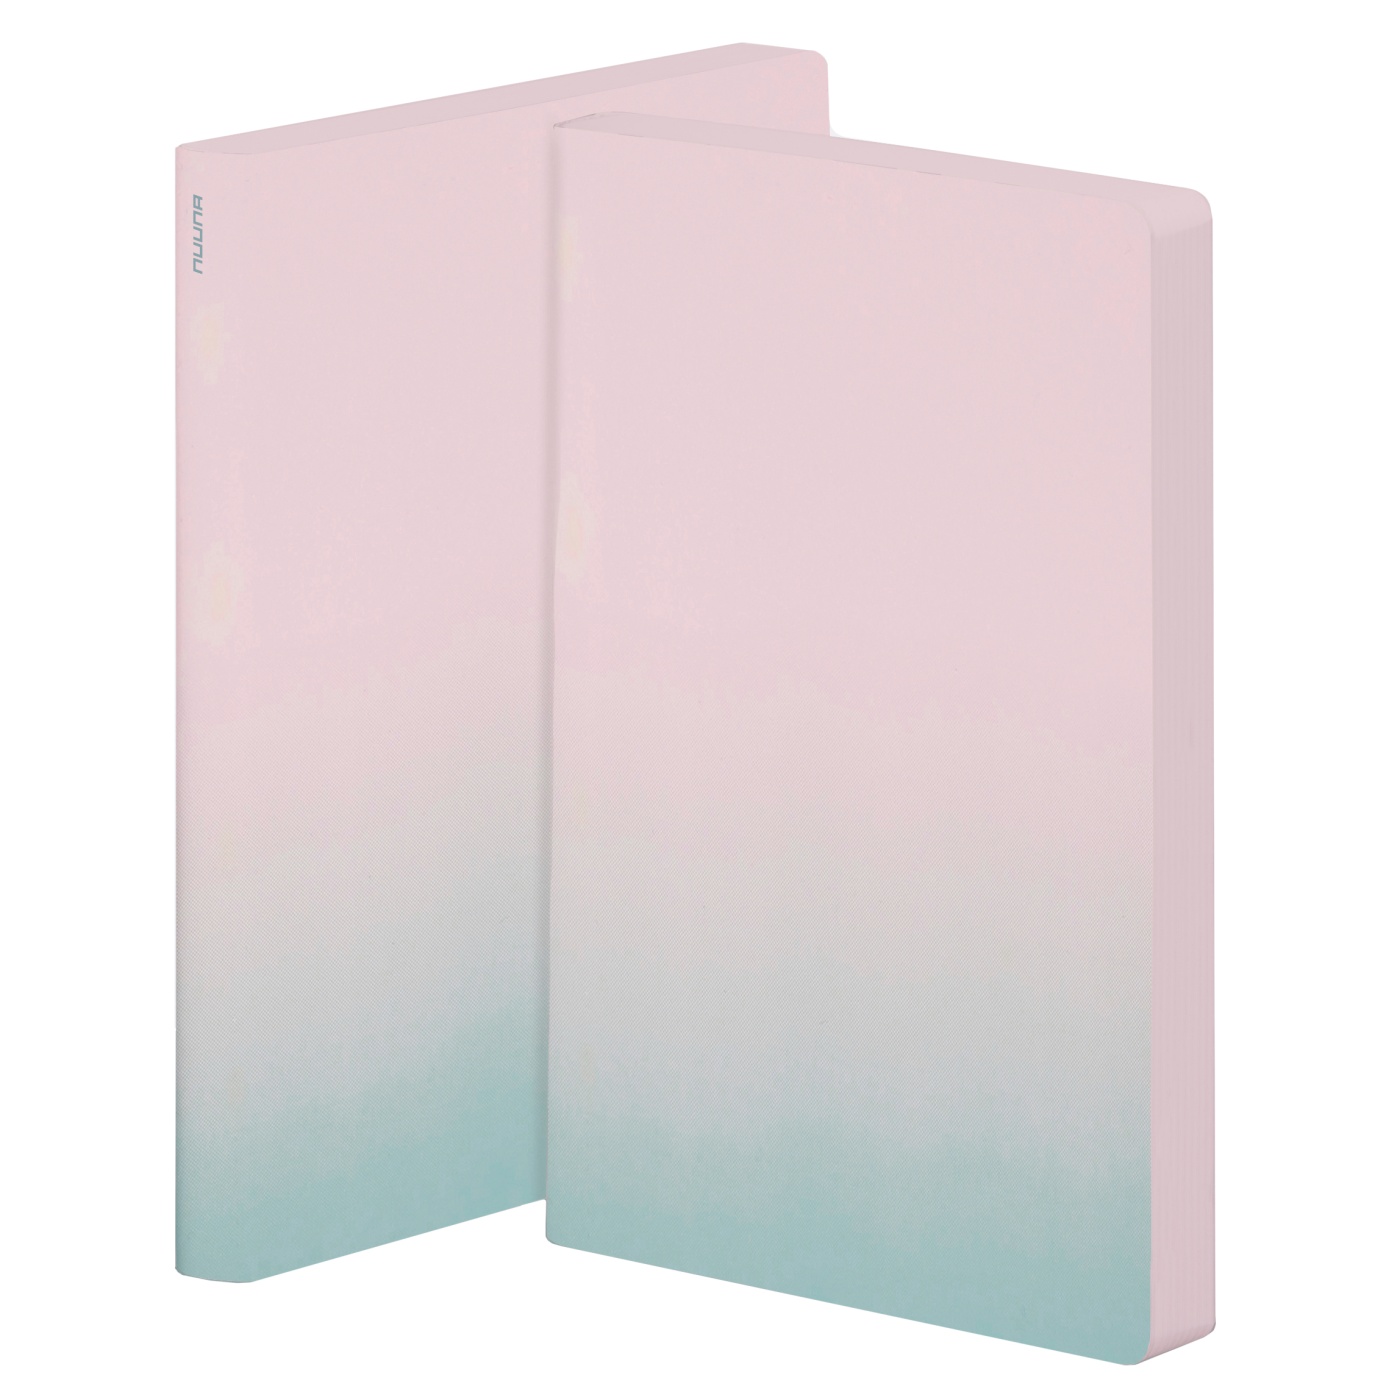 Notebook Colour Clash L Light - Pink Haze in the group Paper & Pads / Note & Memo / Notebooks & Journals at Voorcrea (104877)